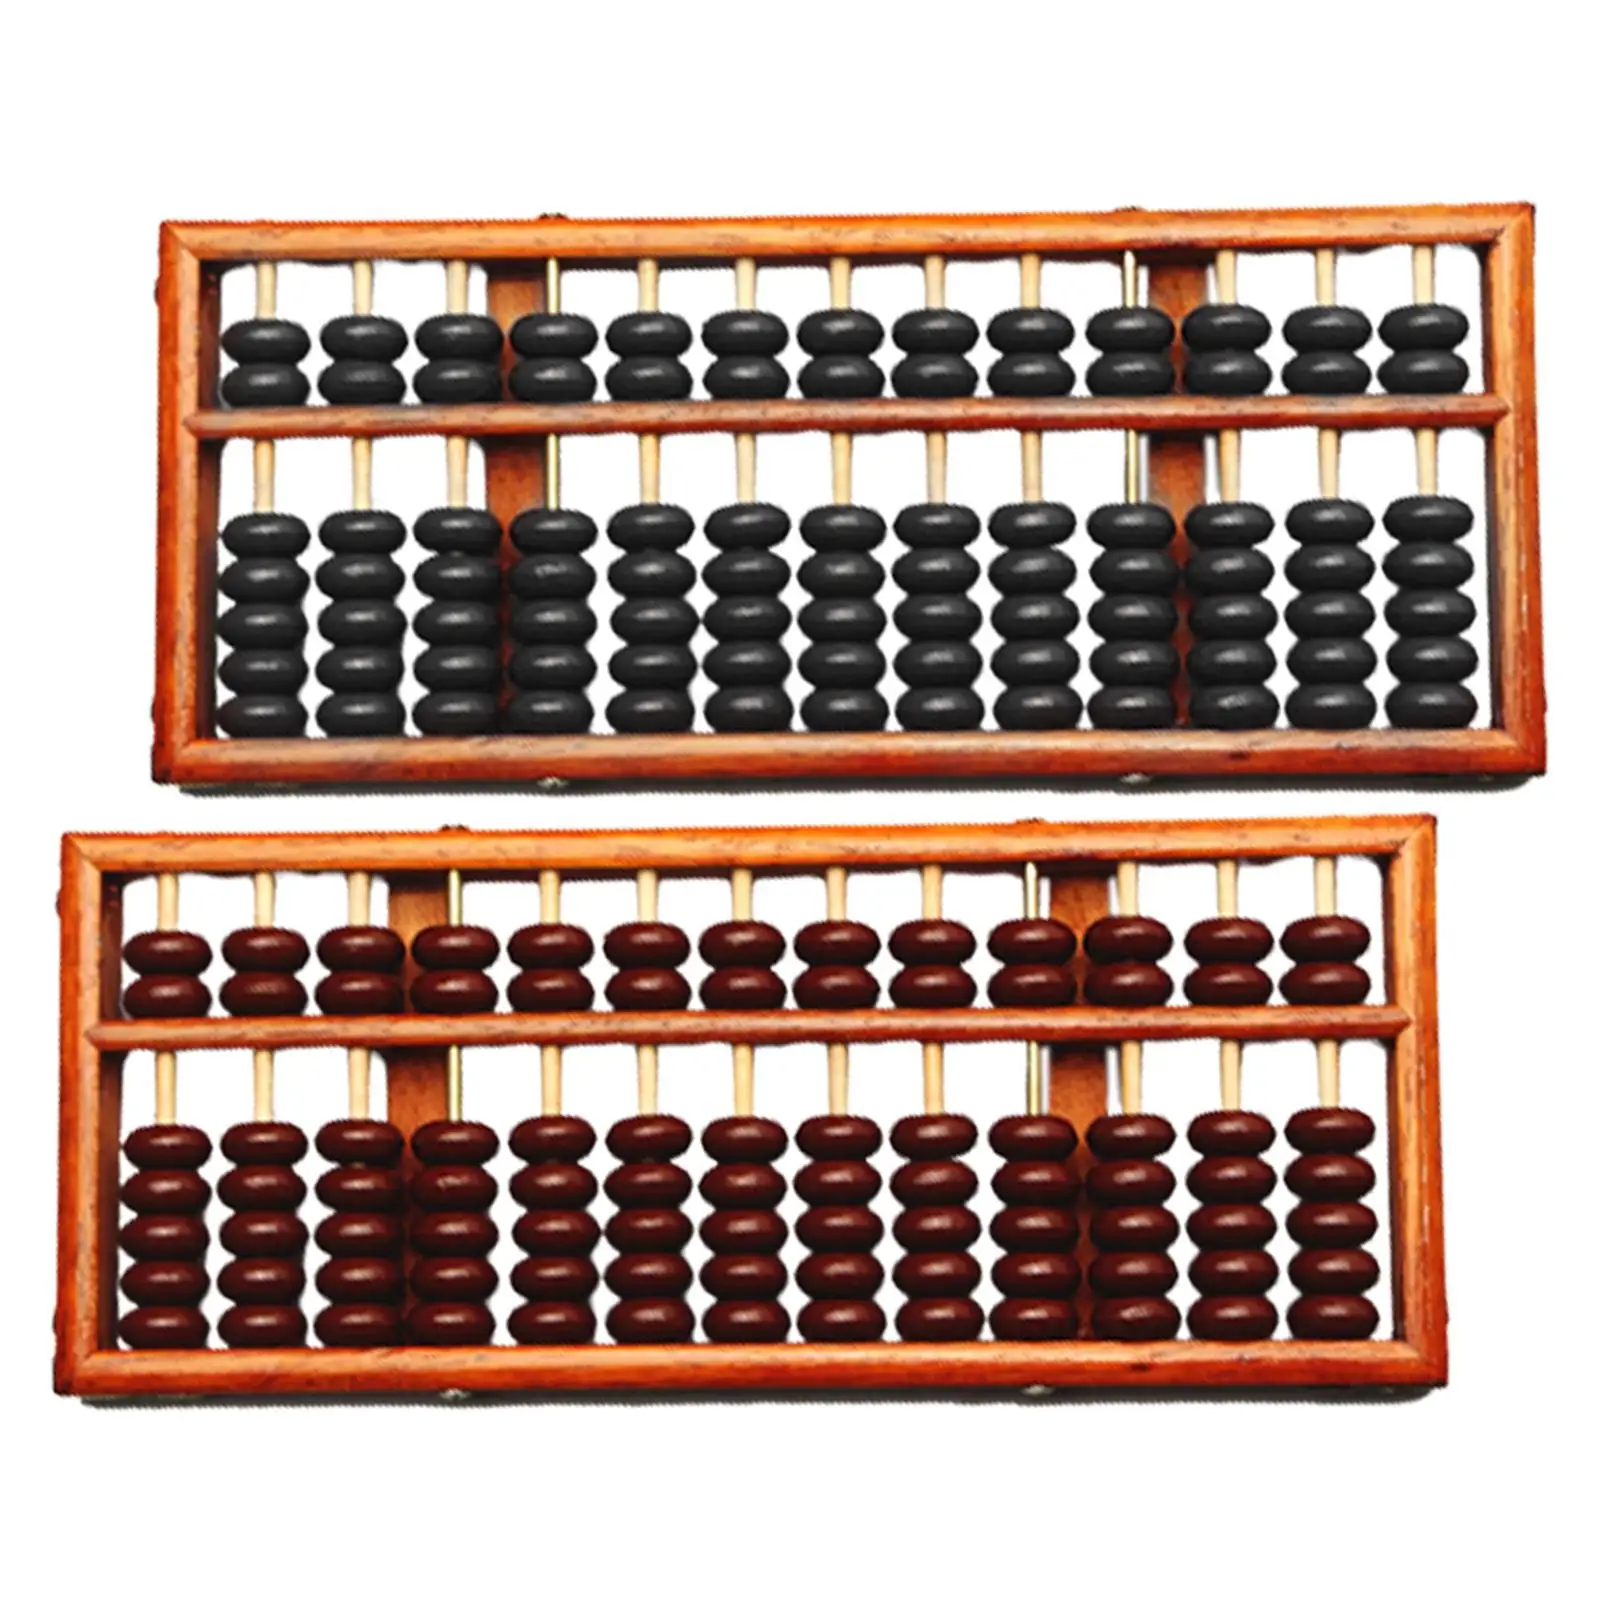 13 Column Chinese Wooden Abacus Classical Counting Ornament for Adults Kids